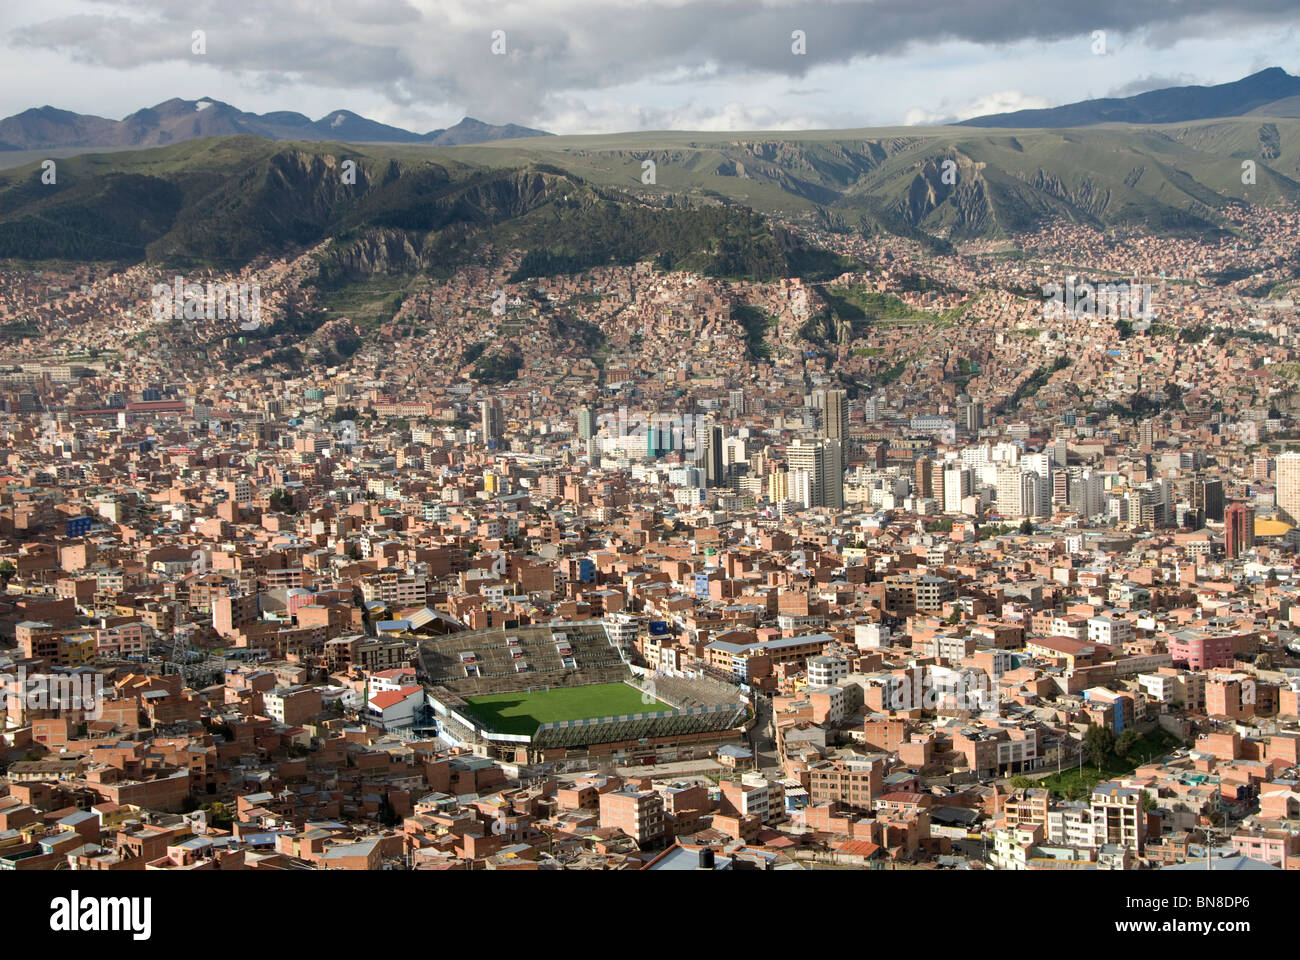 Overview of La Paz city showing stadium and mix of housing and office blocks Stock Photo